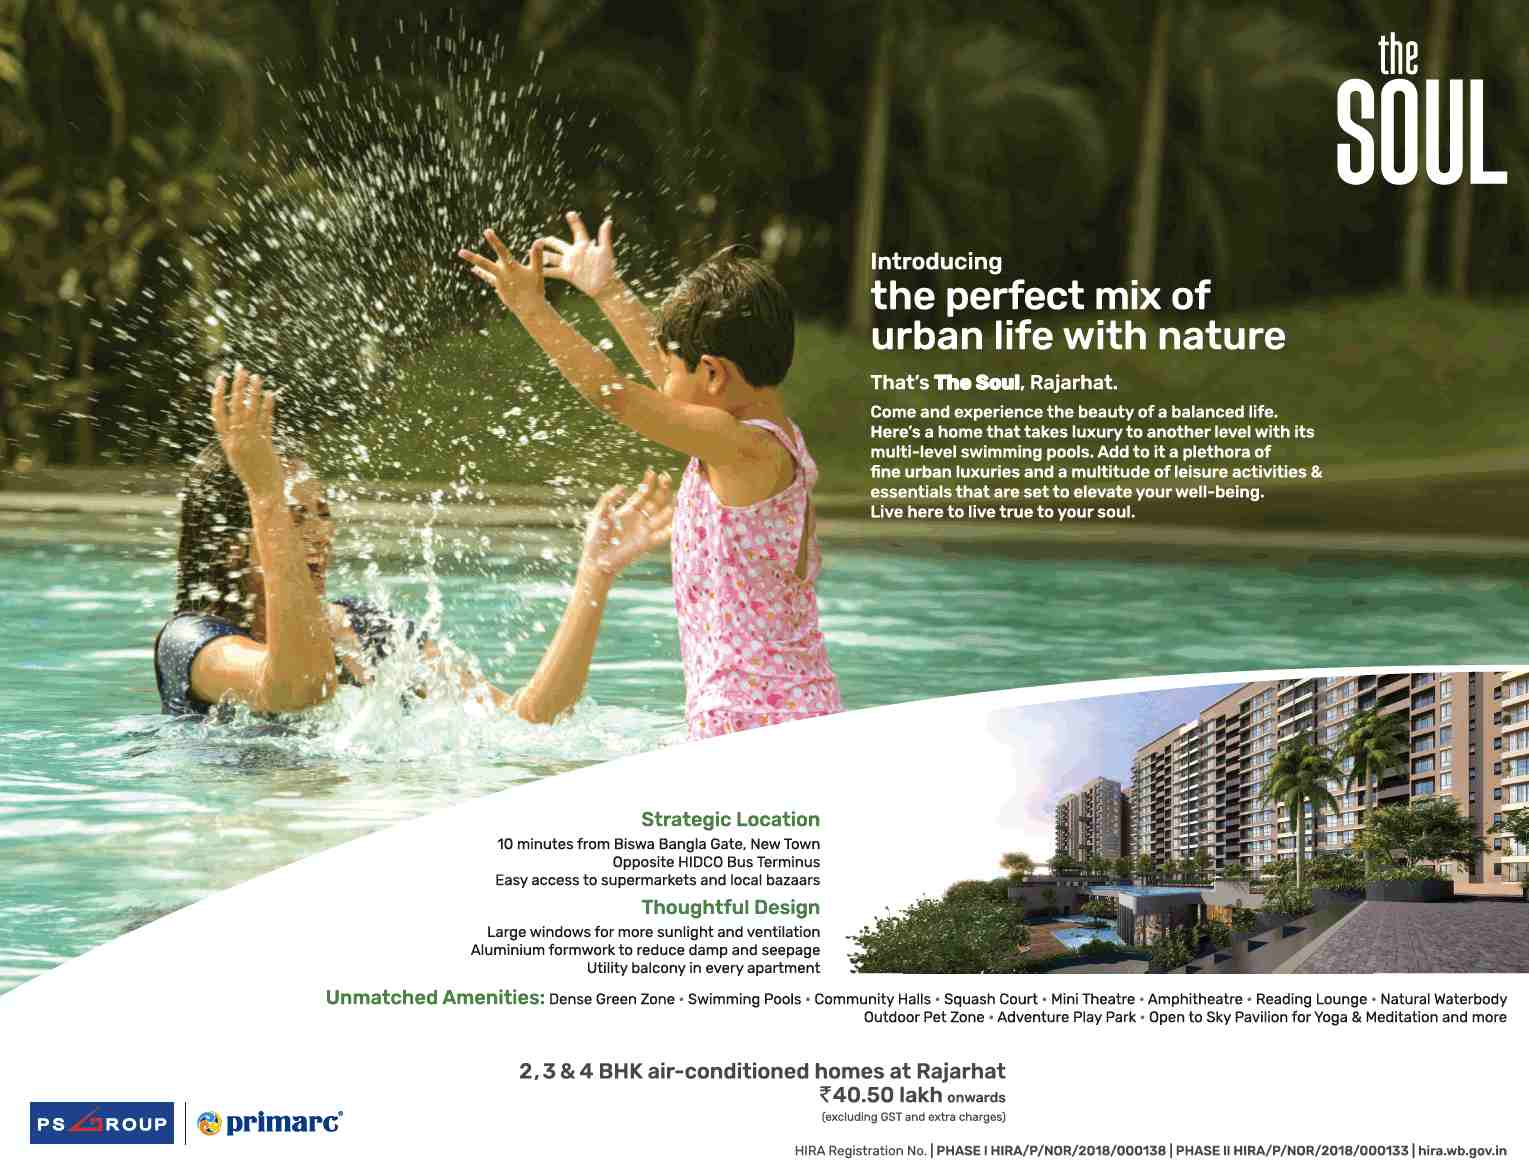 Introducing the perfect mix of urban life with nature at PS Primarc The Soul in Kolkata Update